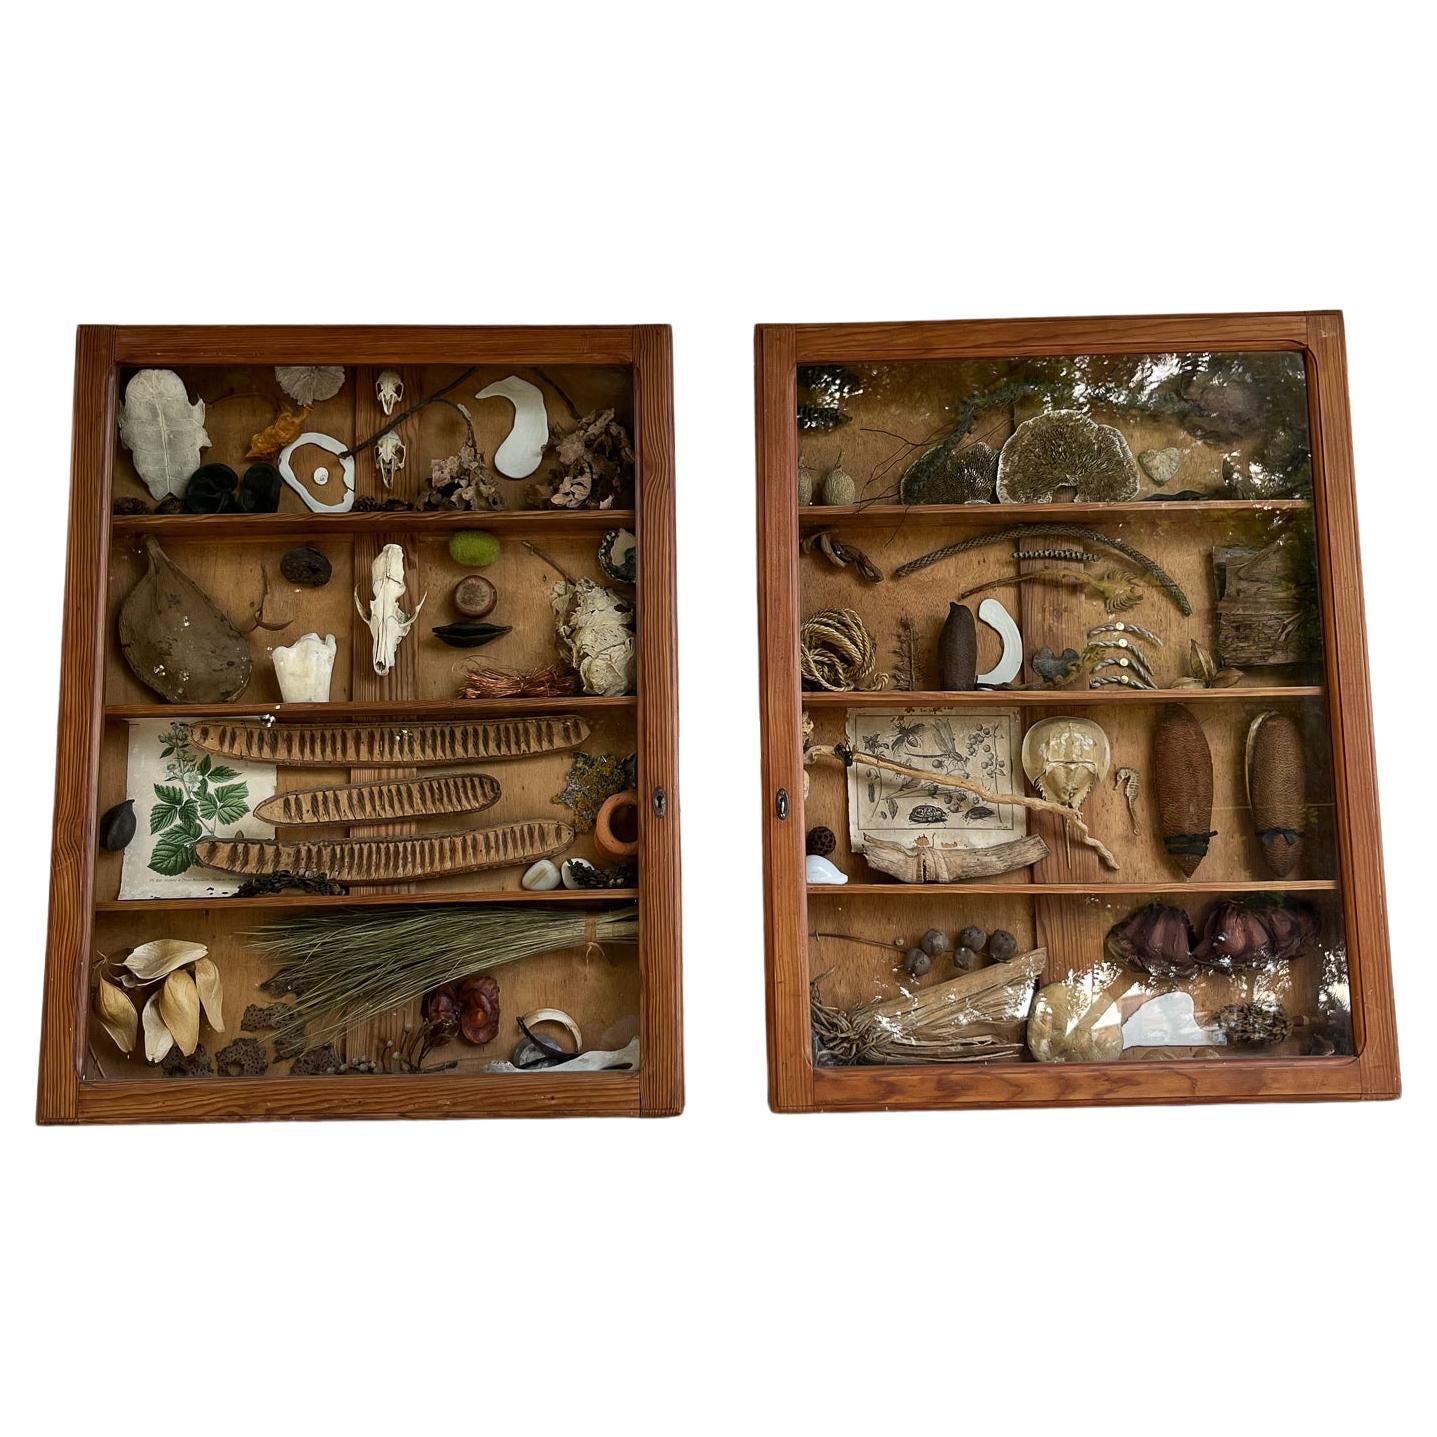 Cabinets of Curiosities by Teresa Lacerda